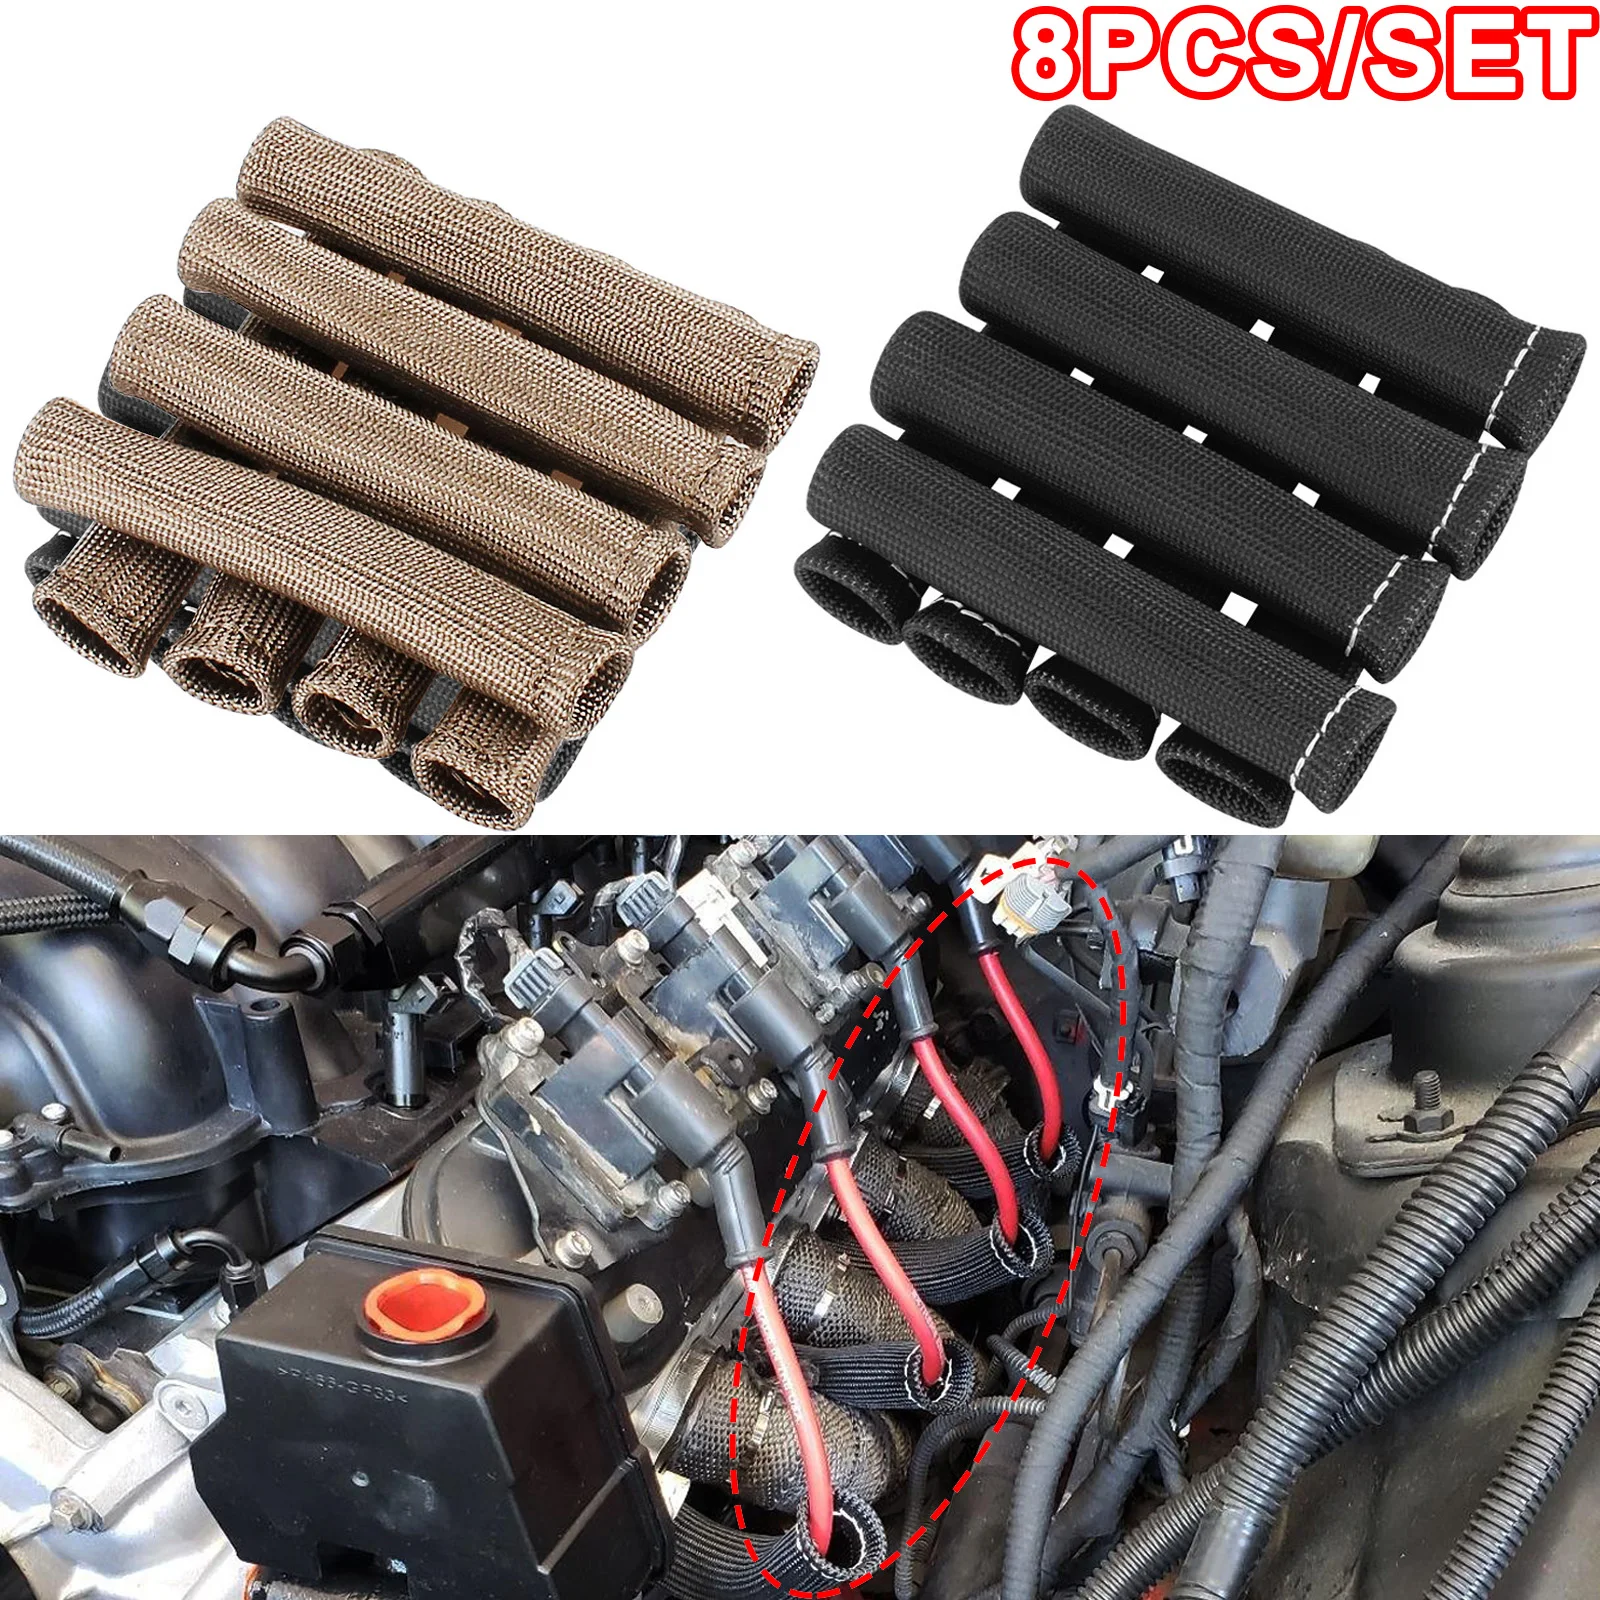 

8PCS/Set 6 Inch Spark Plug Wire Boots Heat Shield Protector Sleeve 2500 Degree Spark Plug Heat Cover Wrap for SBC BBC 350 454